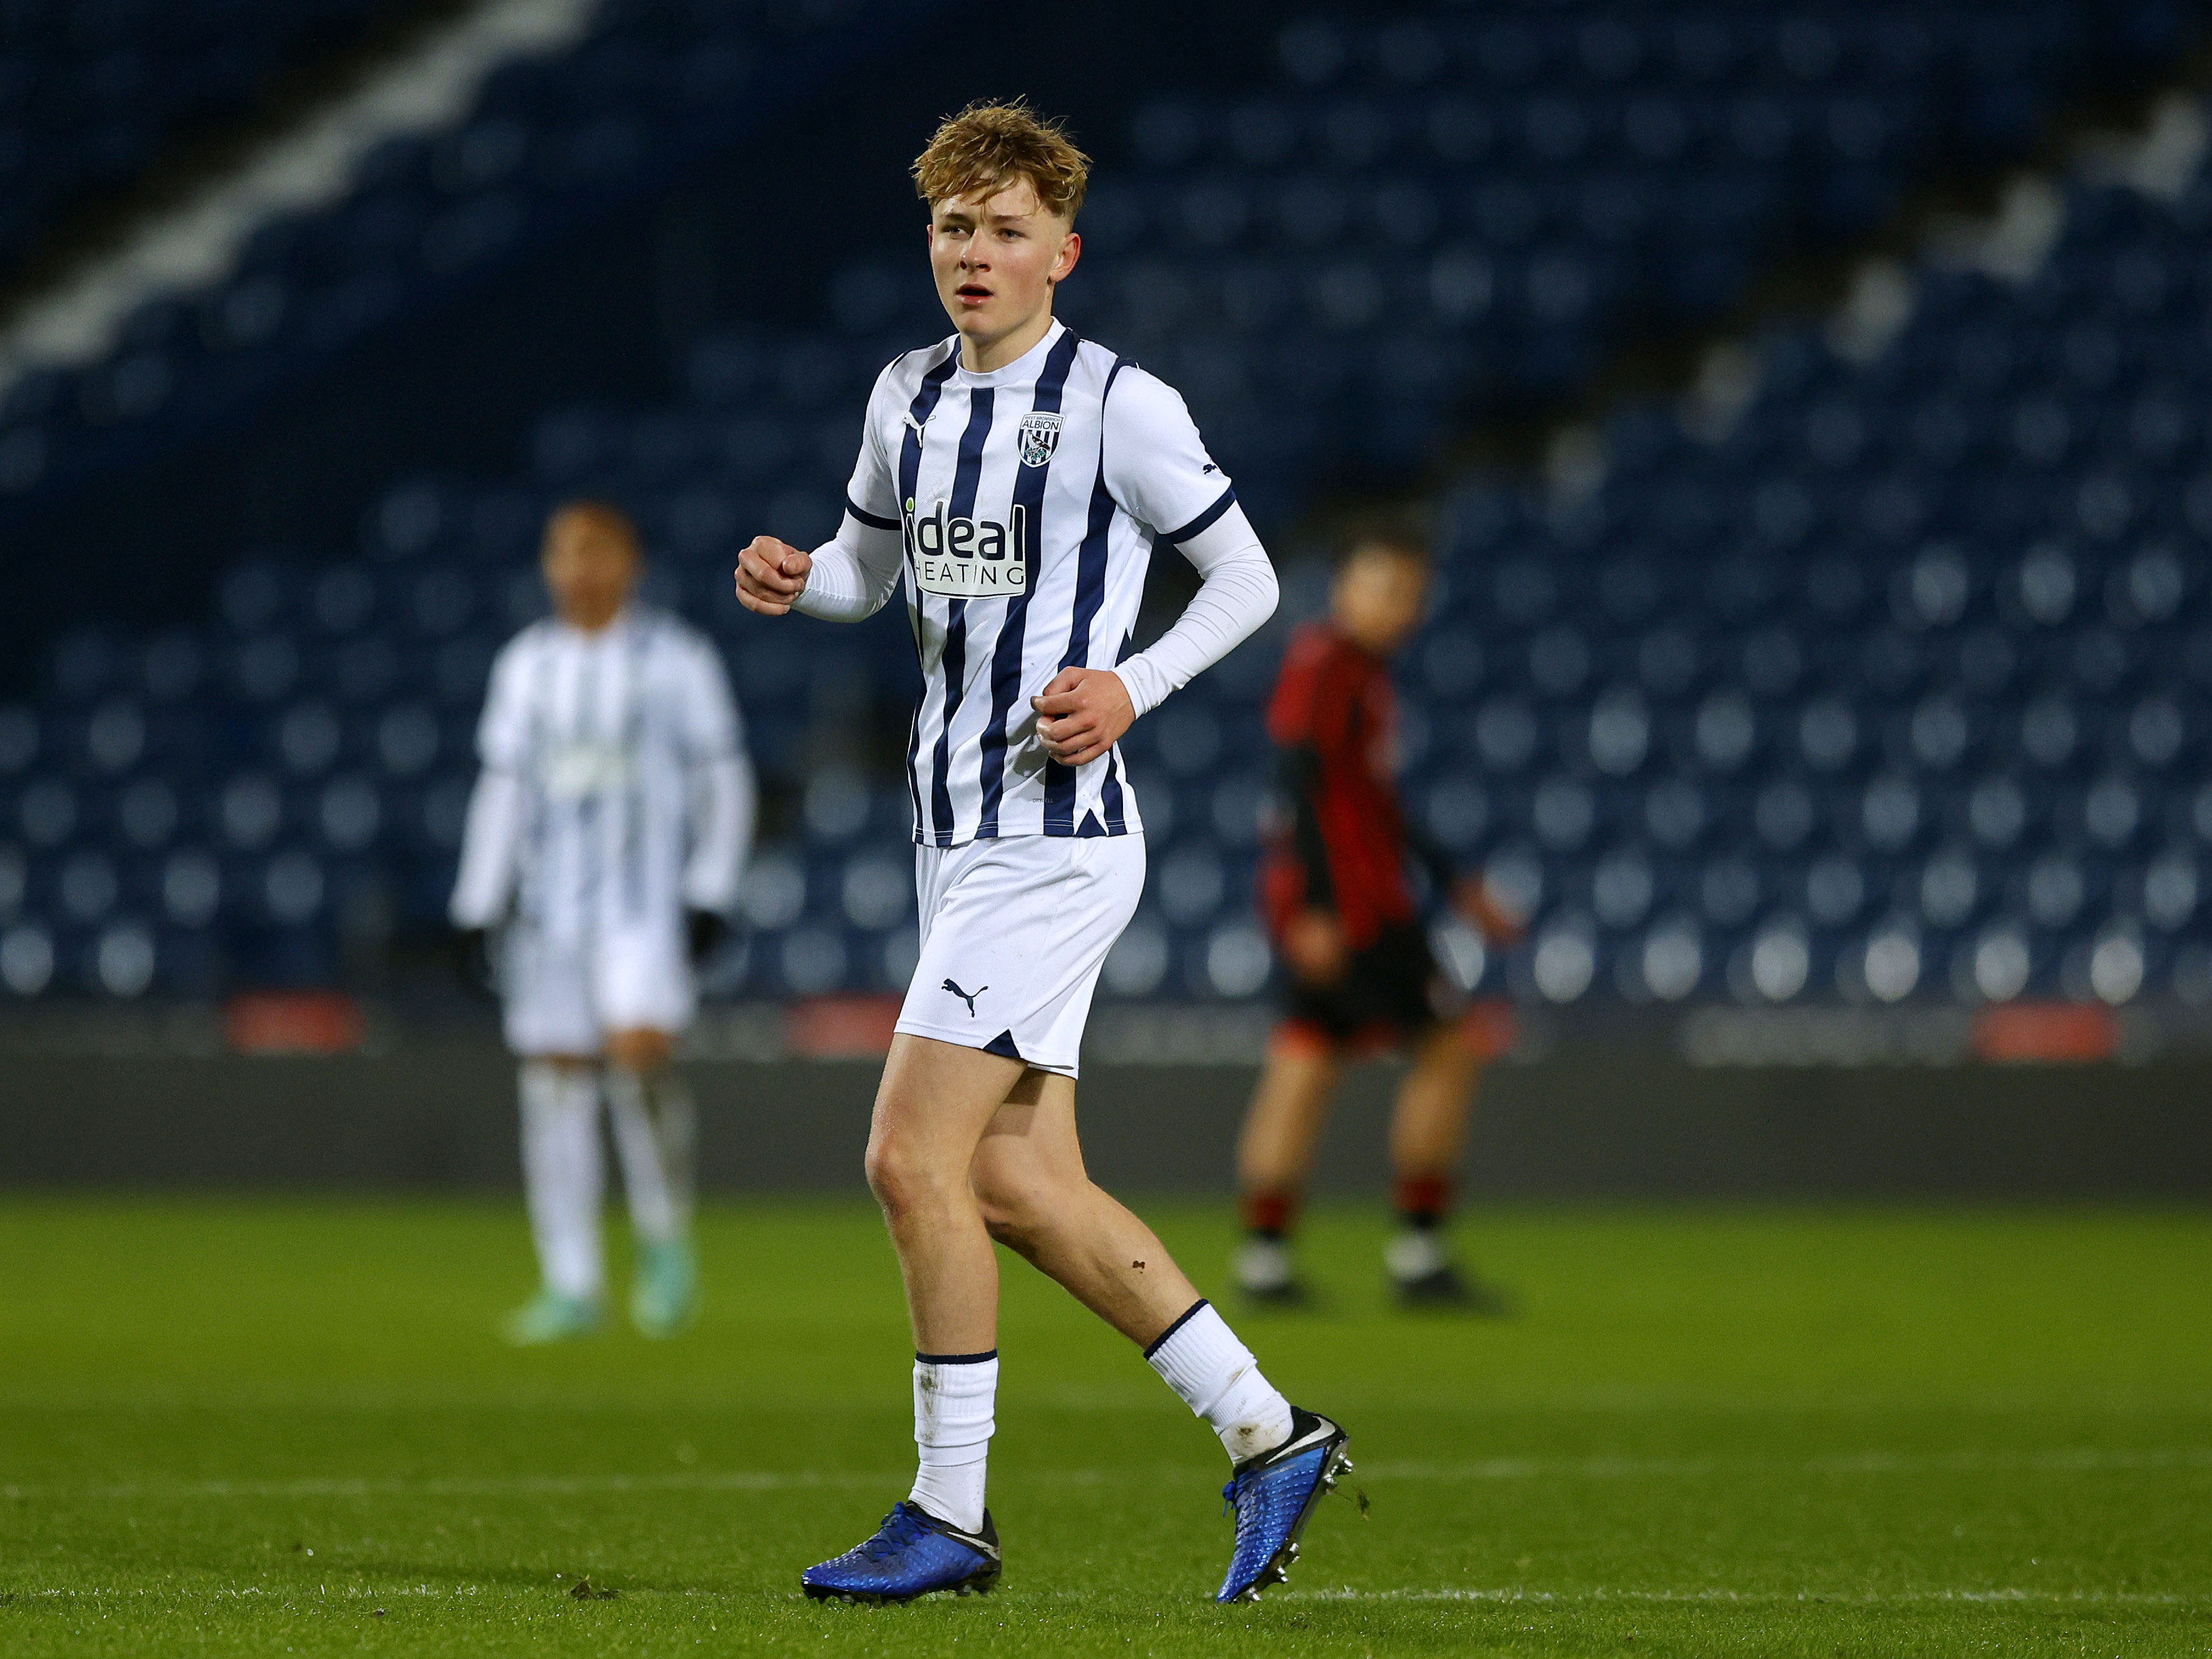 A photo of Albion U18s midfielder Ollie Bostock in action at The Hawthorns